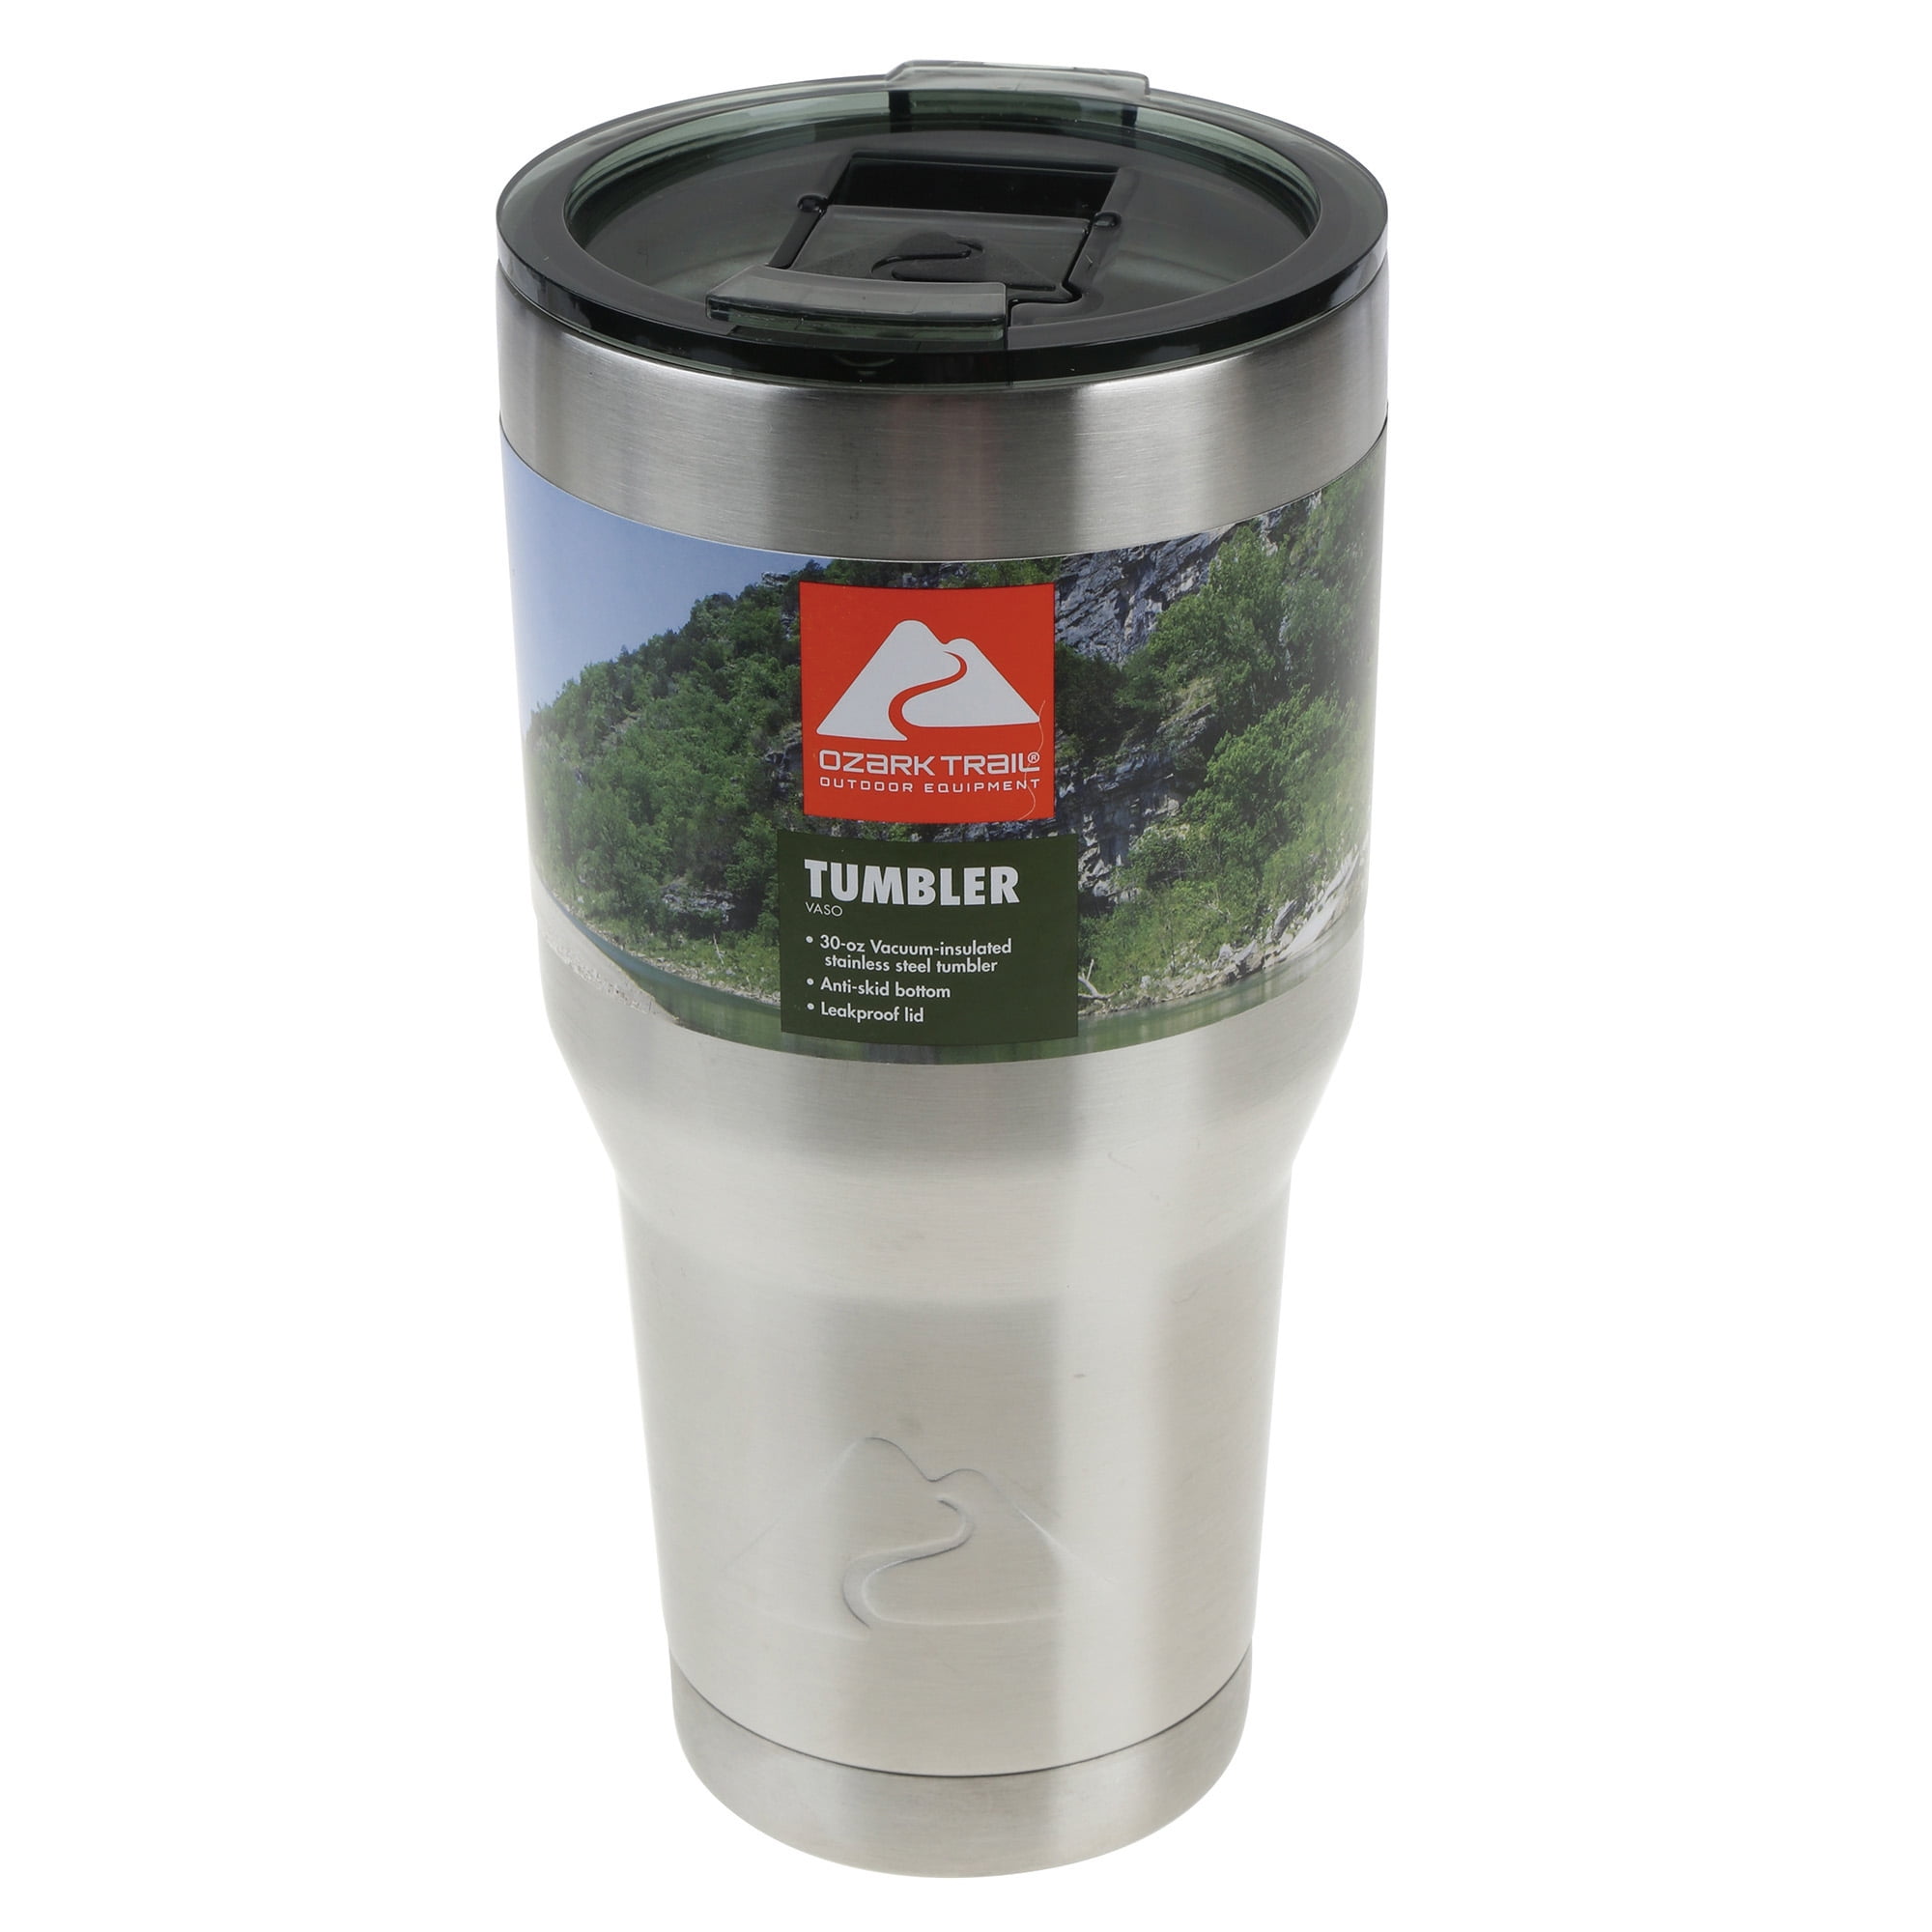 Zak Designs 30oz Stainless Steel Insulated Travel Tumbler with 2-in-1 Lid for Hot & Cold - Jade